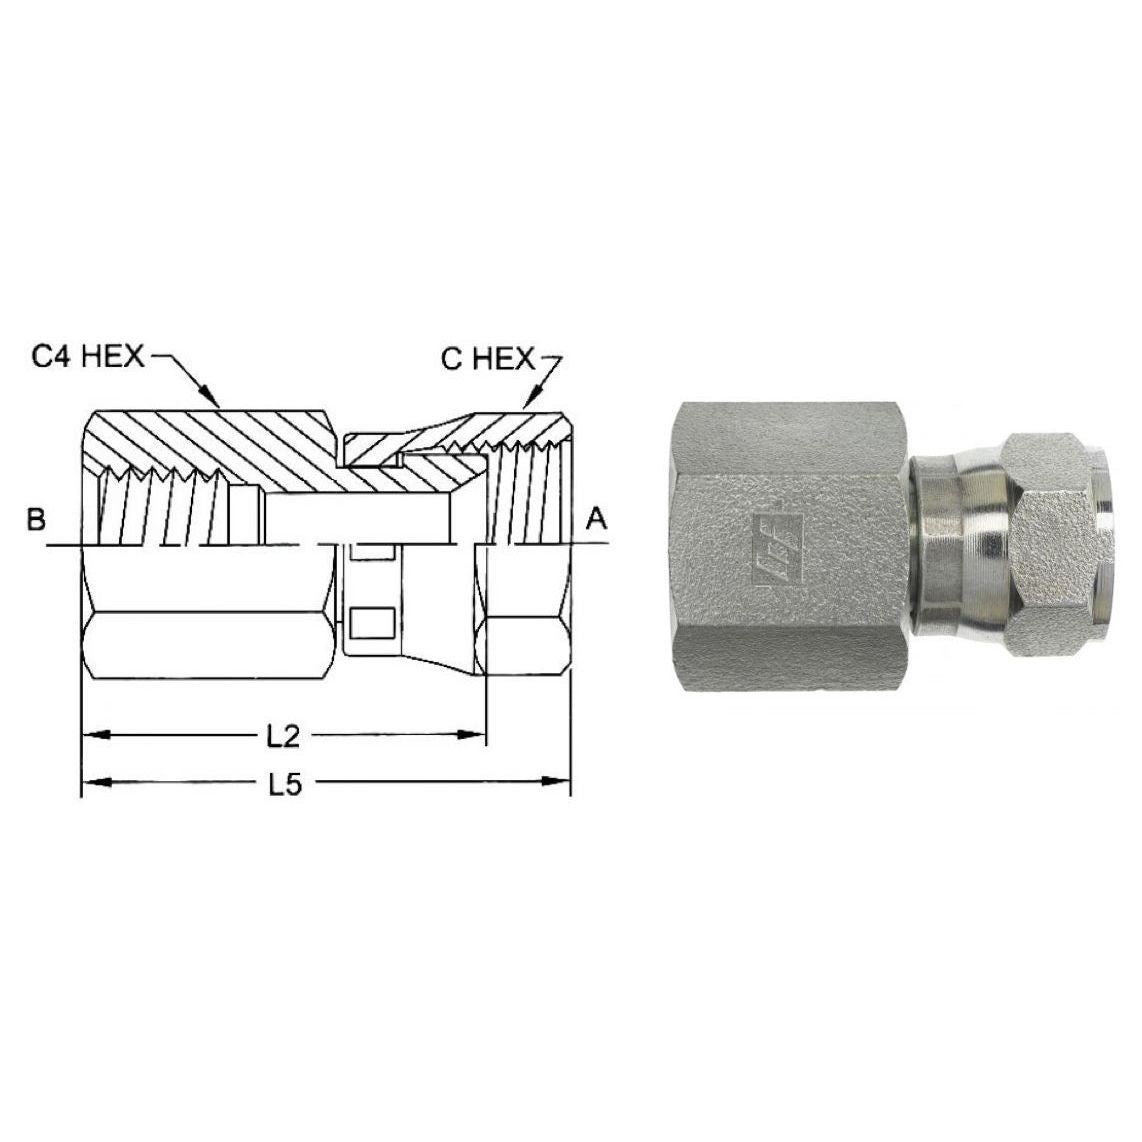 6506-04-04-SS : OneHydraulicsAdapter, Straight, 0.25 (1/4") Female JIC x 0.25 (1/4") Female, Stainless Steel, 6000psi